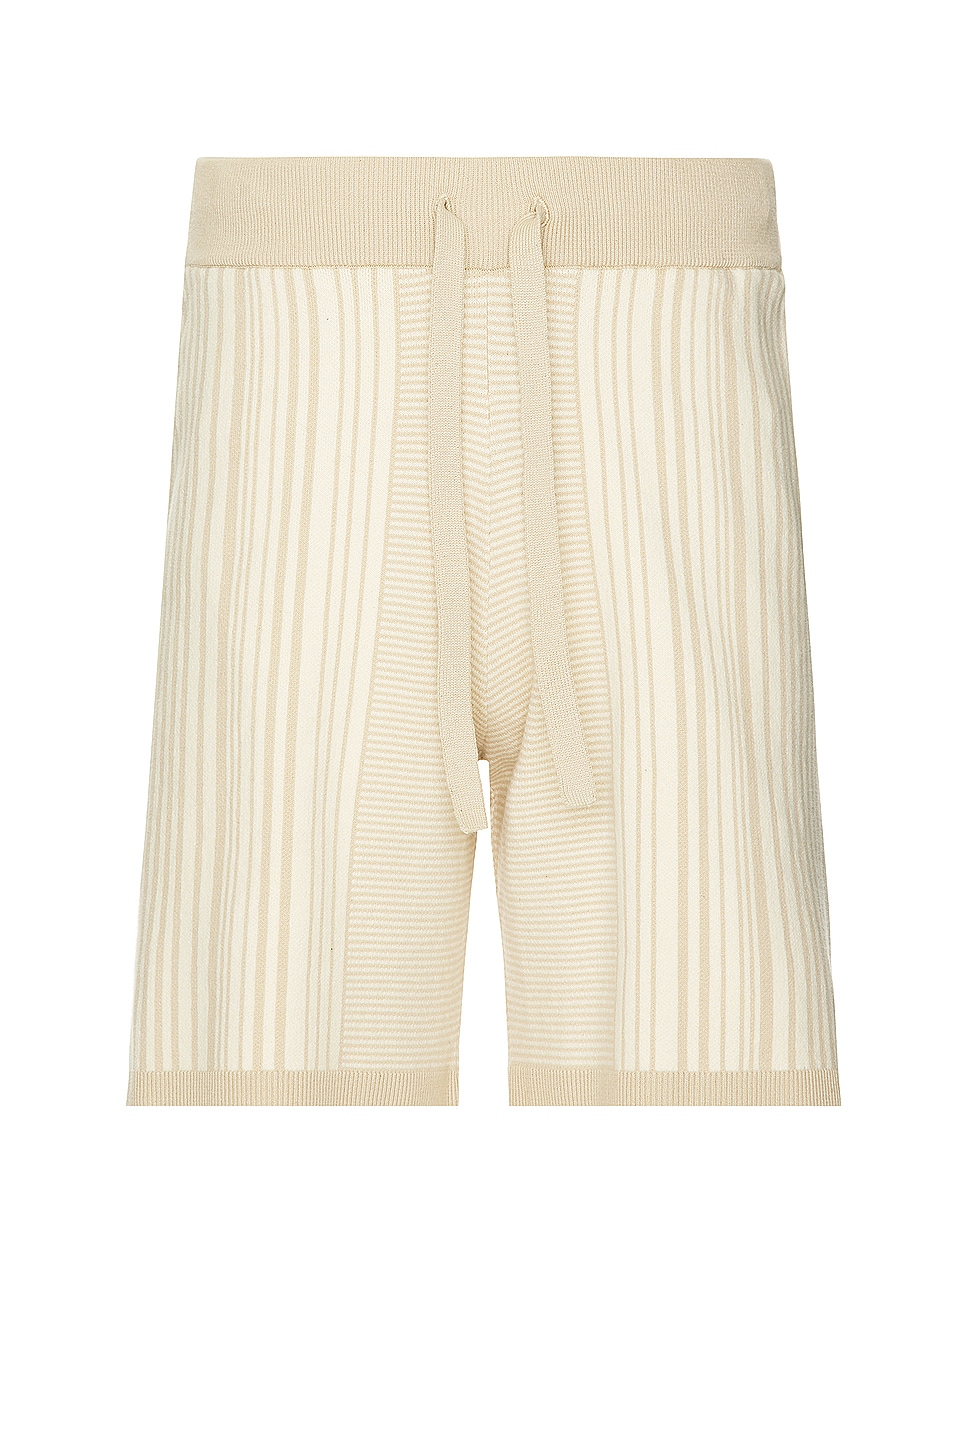 Image 1 of WAO Fully Knitted Pattern Short in Cream & Natural